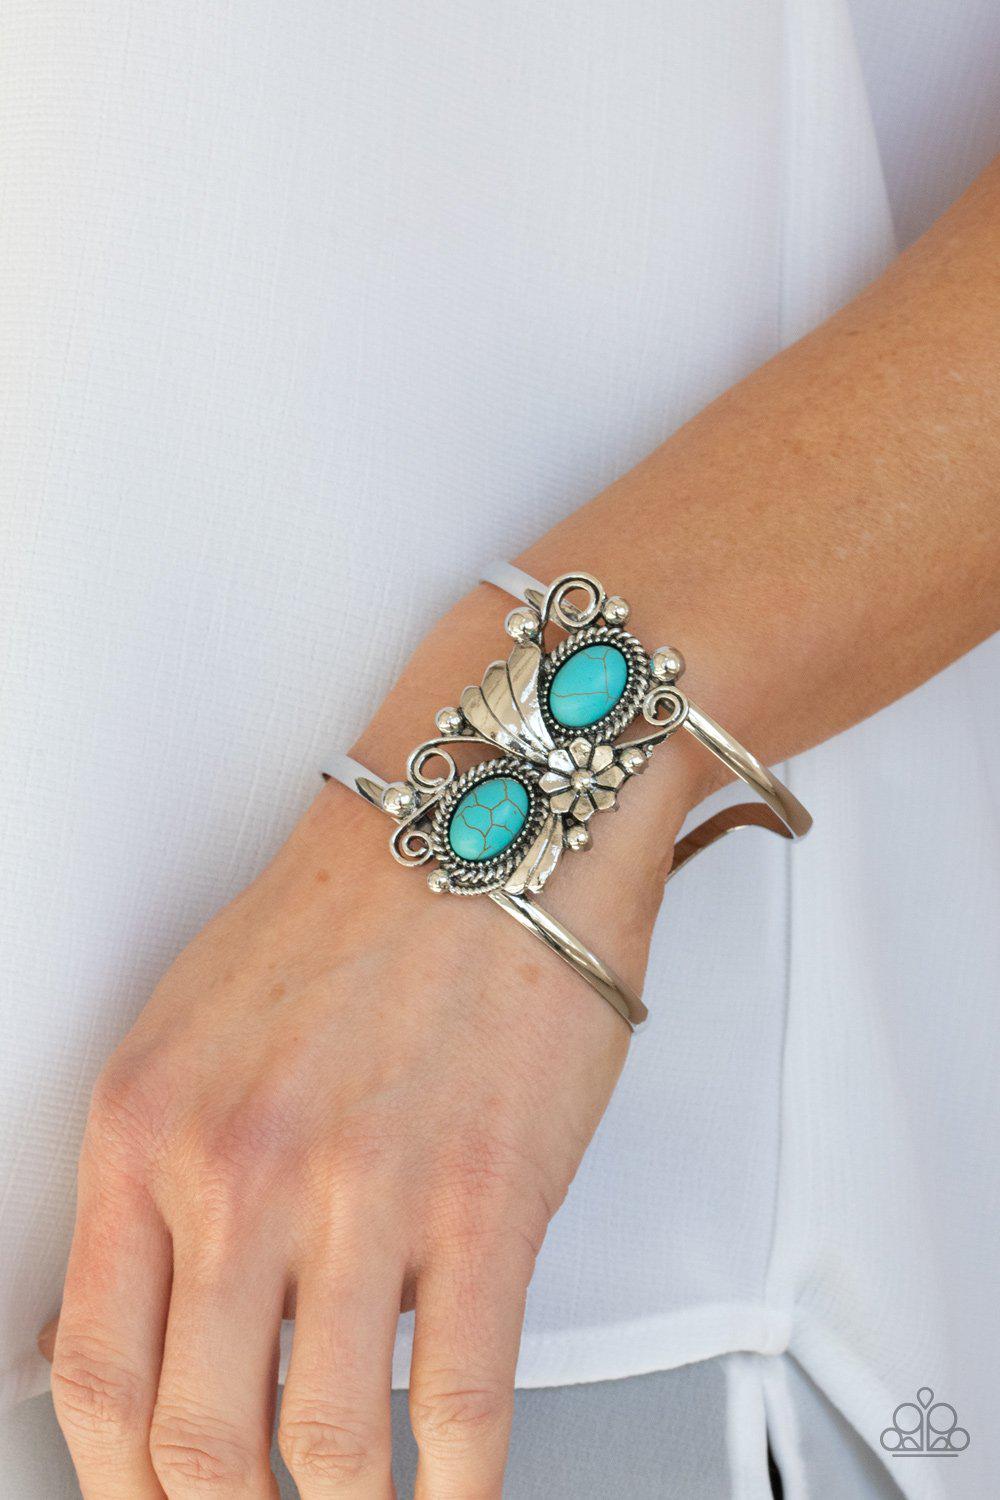 Mojave Flower Girl Turquoise Blue Stone Flower Cuff Bracelet - Paparazzi Accessories- model - CarasShop.com - $5 Jewelry by Cara Jewels